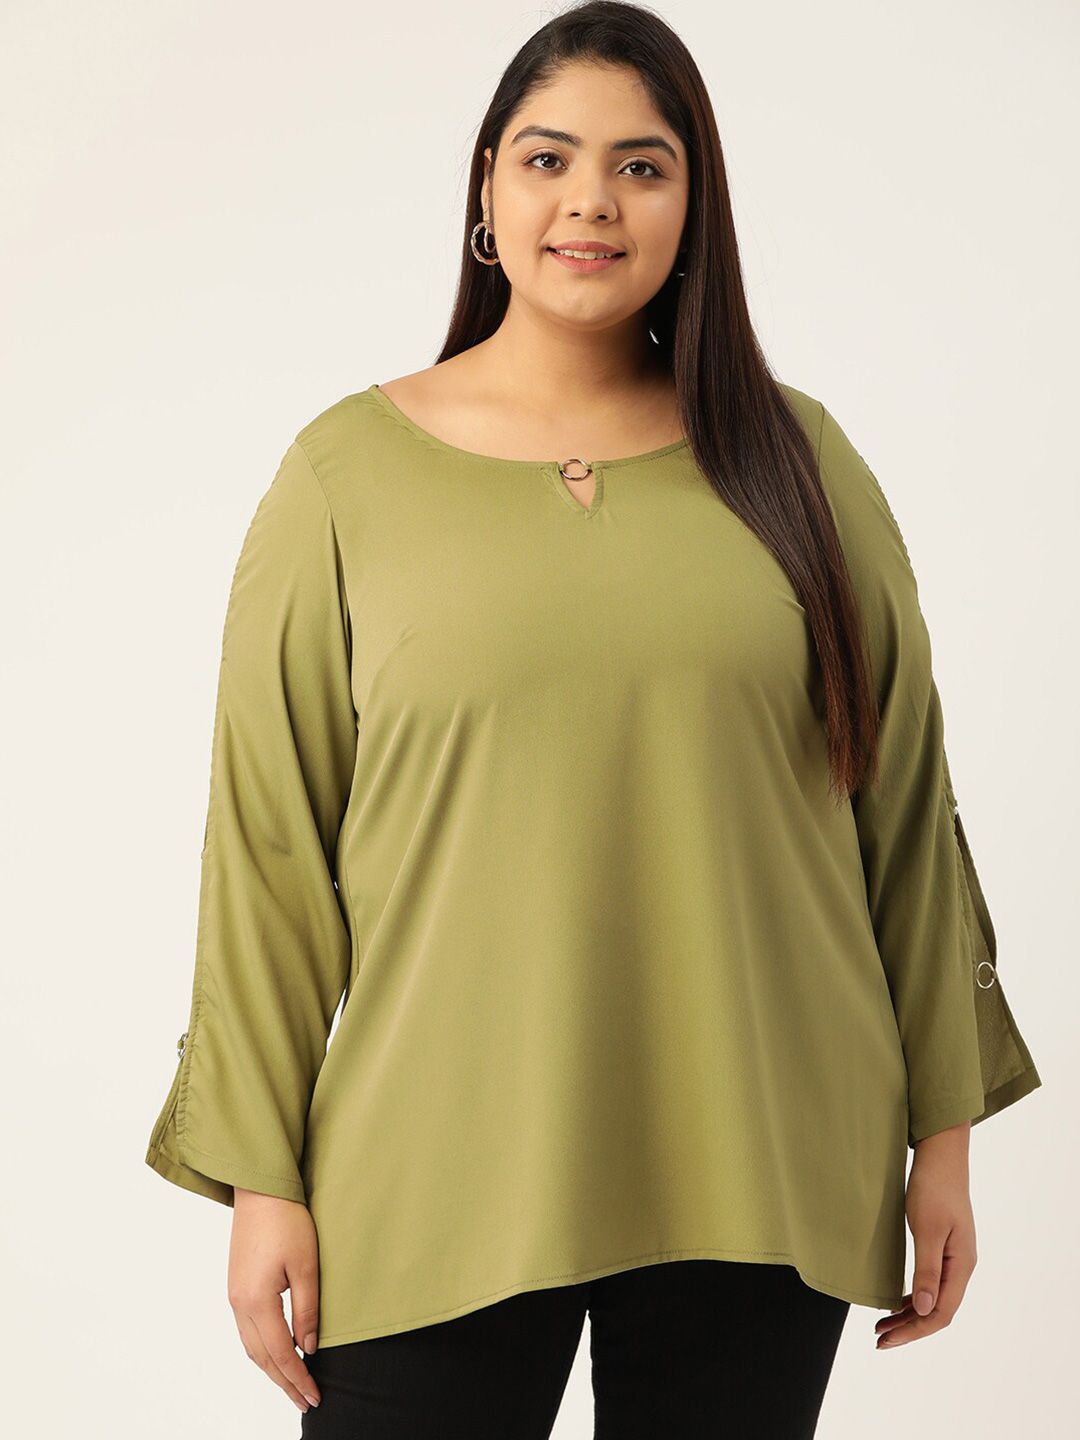 theRebelinme Women Plus Size Olive Green Keyhole Neck Crepe Top Price in India